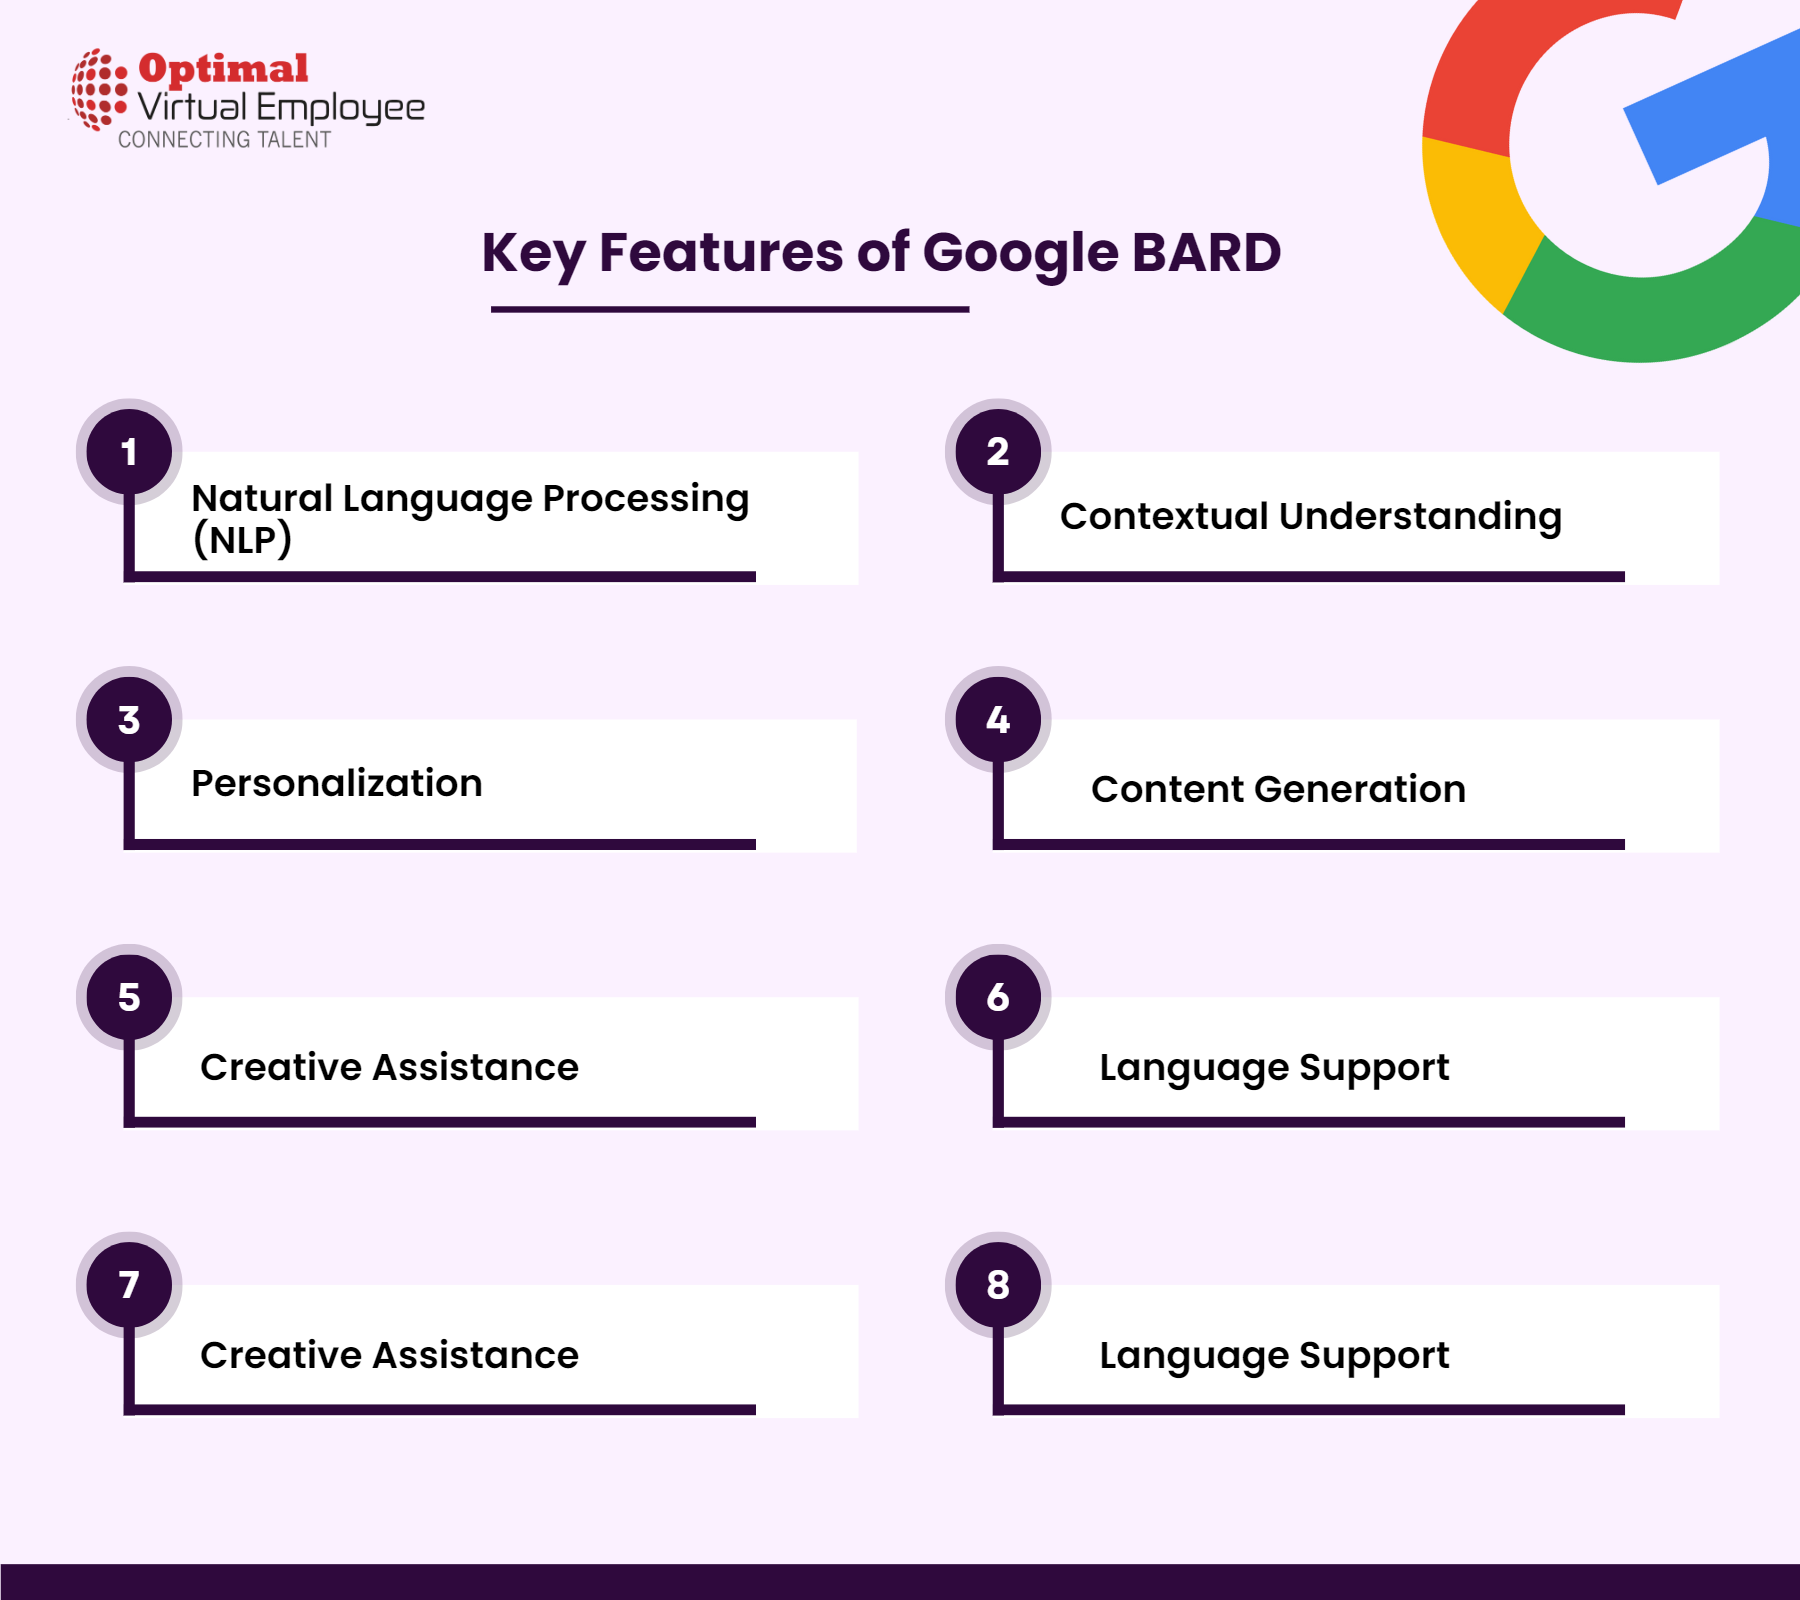 Key Features of Google BARD